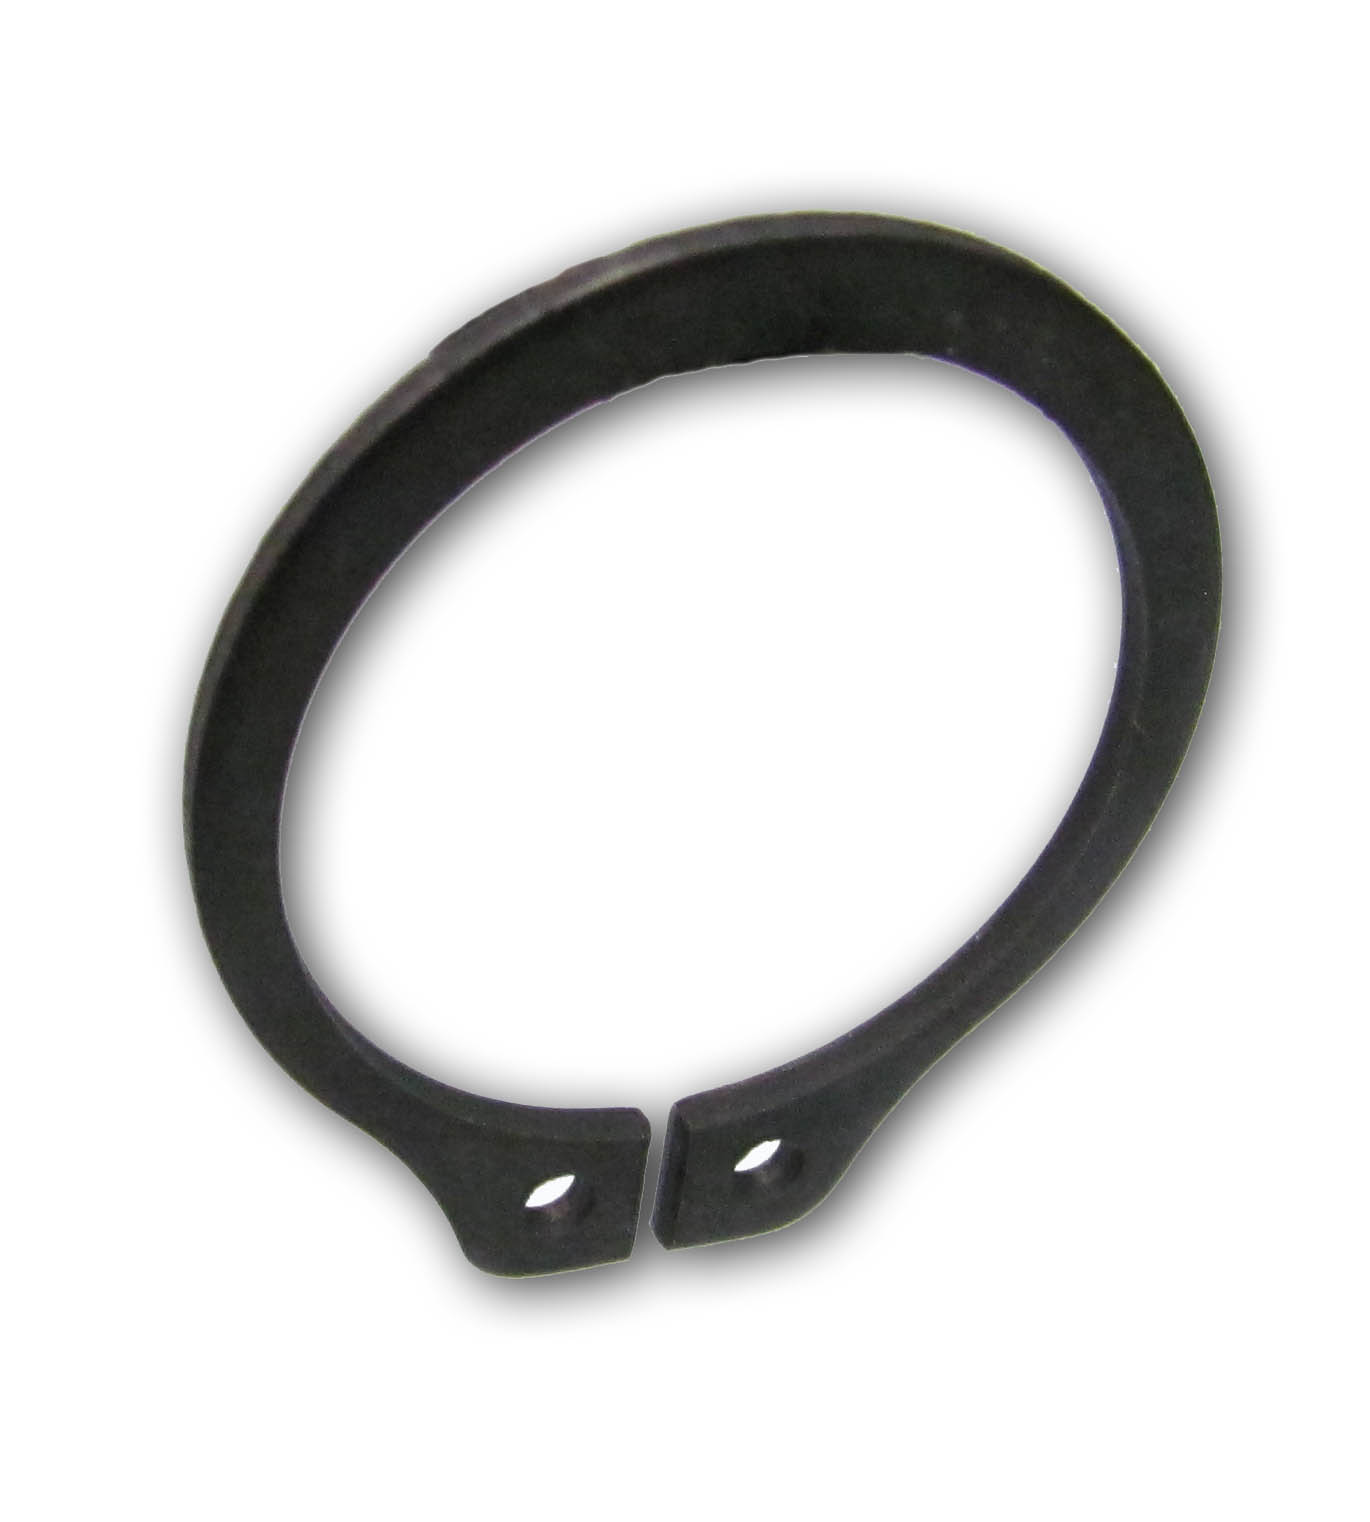 Snap Ring Spare Parts for the OCO Labs Super C Extractor